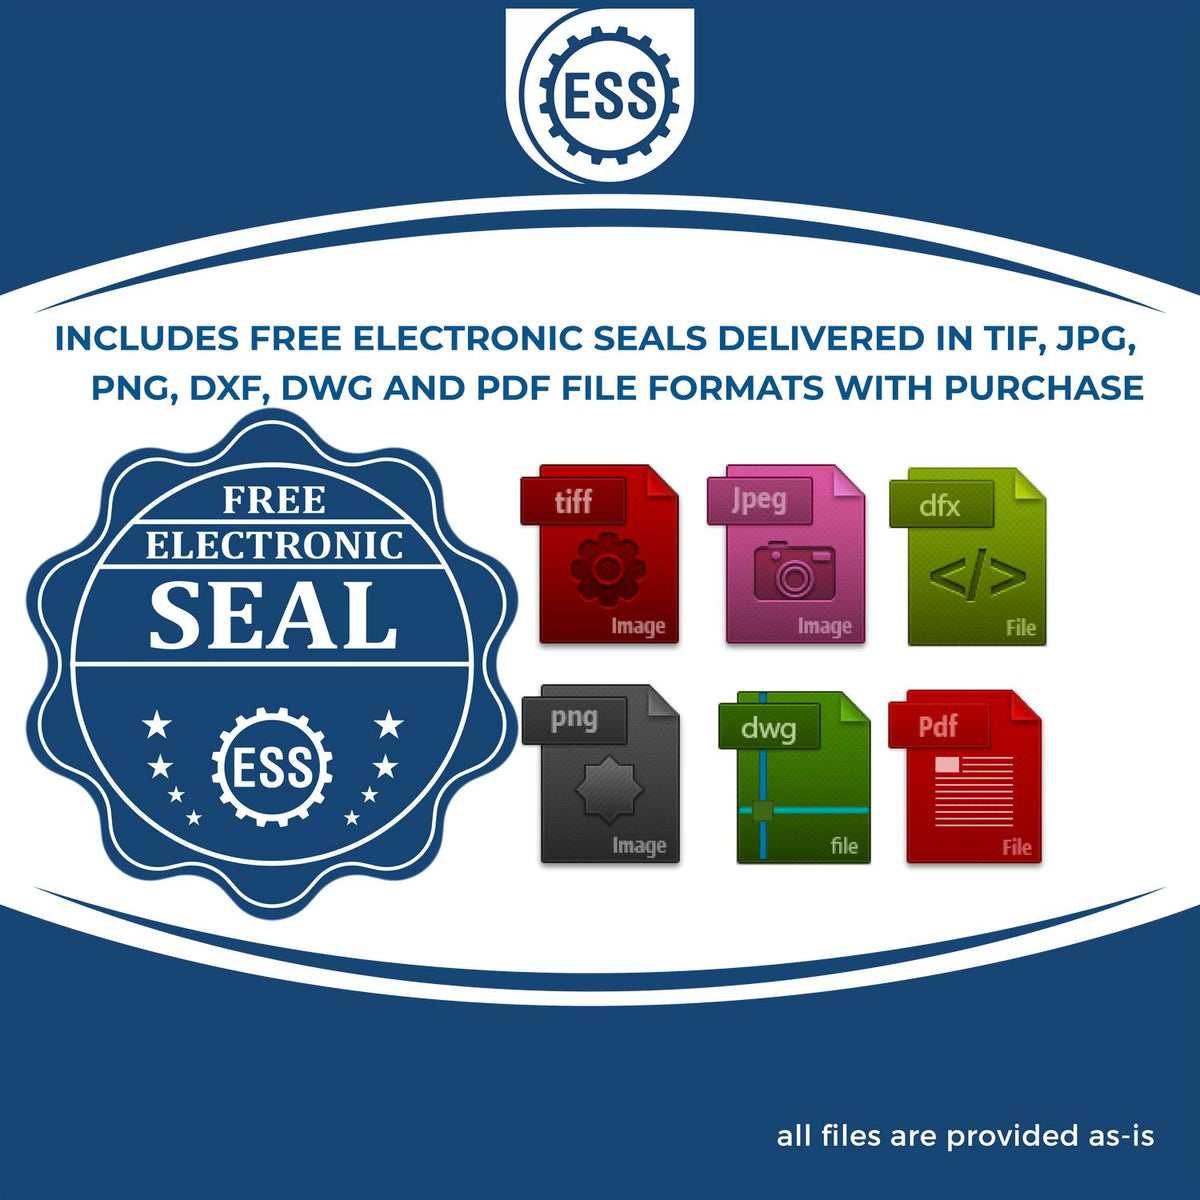 An infographic for the free electronic seal for the Indiana Desk Architect Embossing Seal illustrating the different file type icons such as DXF, DWG, TIF, JPG and PNG.